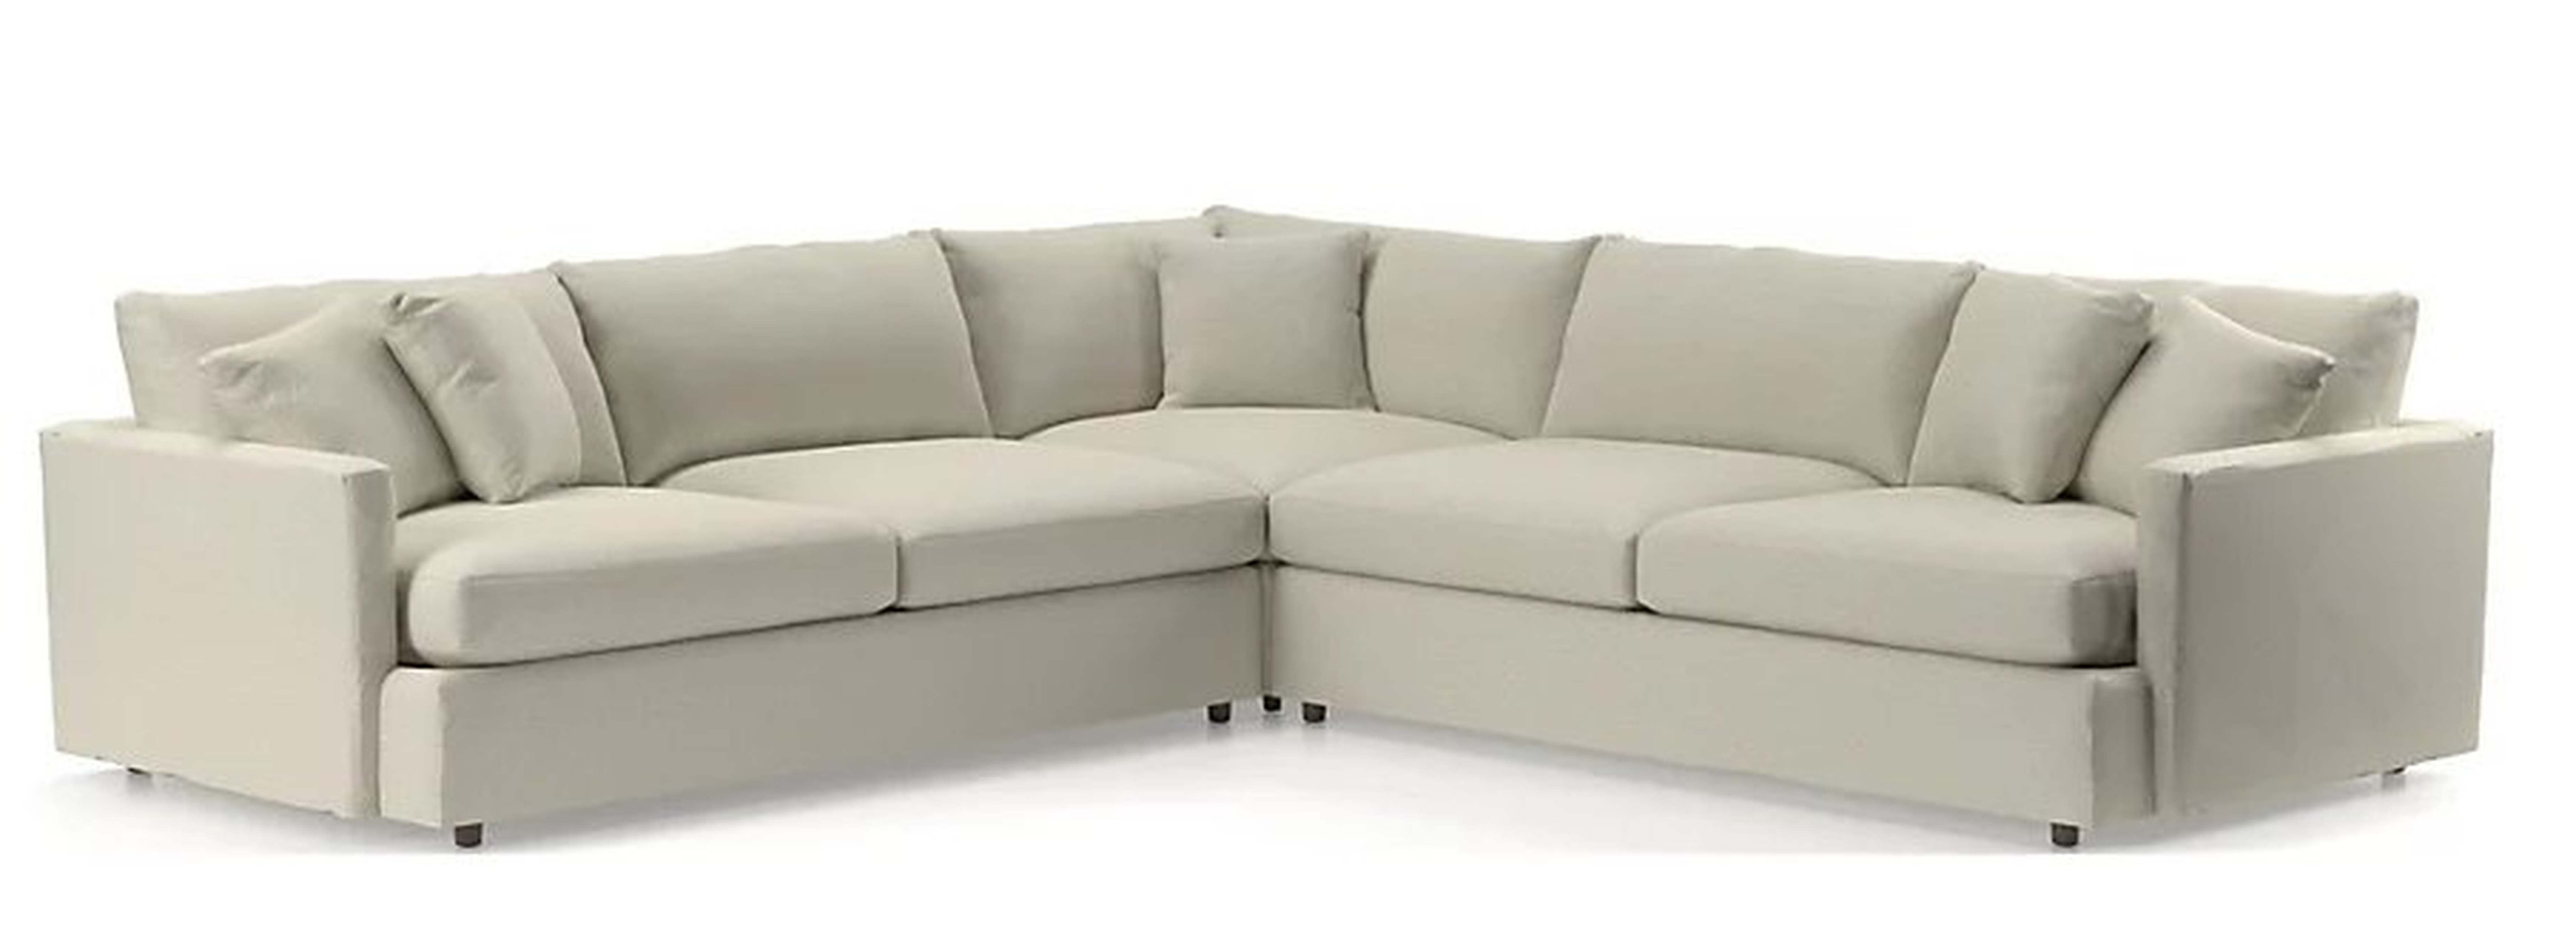 Lounge II 3-Piece Sectional Sofa - Nordic/Latte - Crate and Barrel